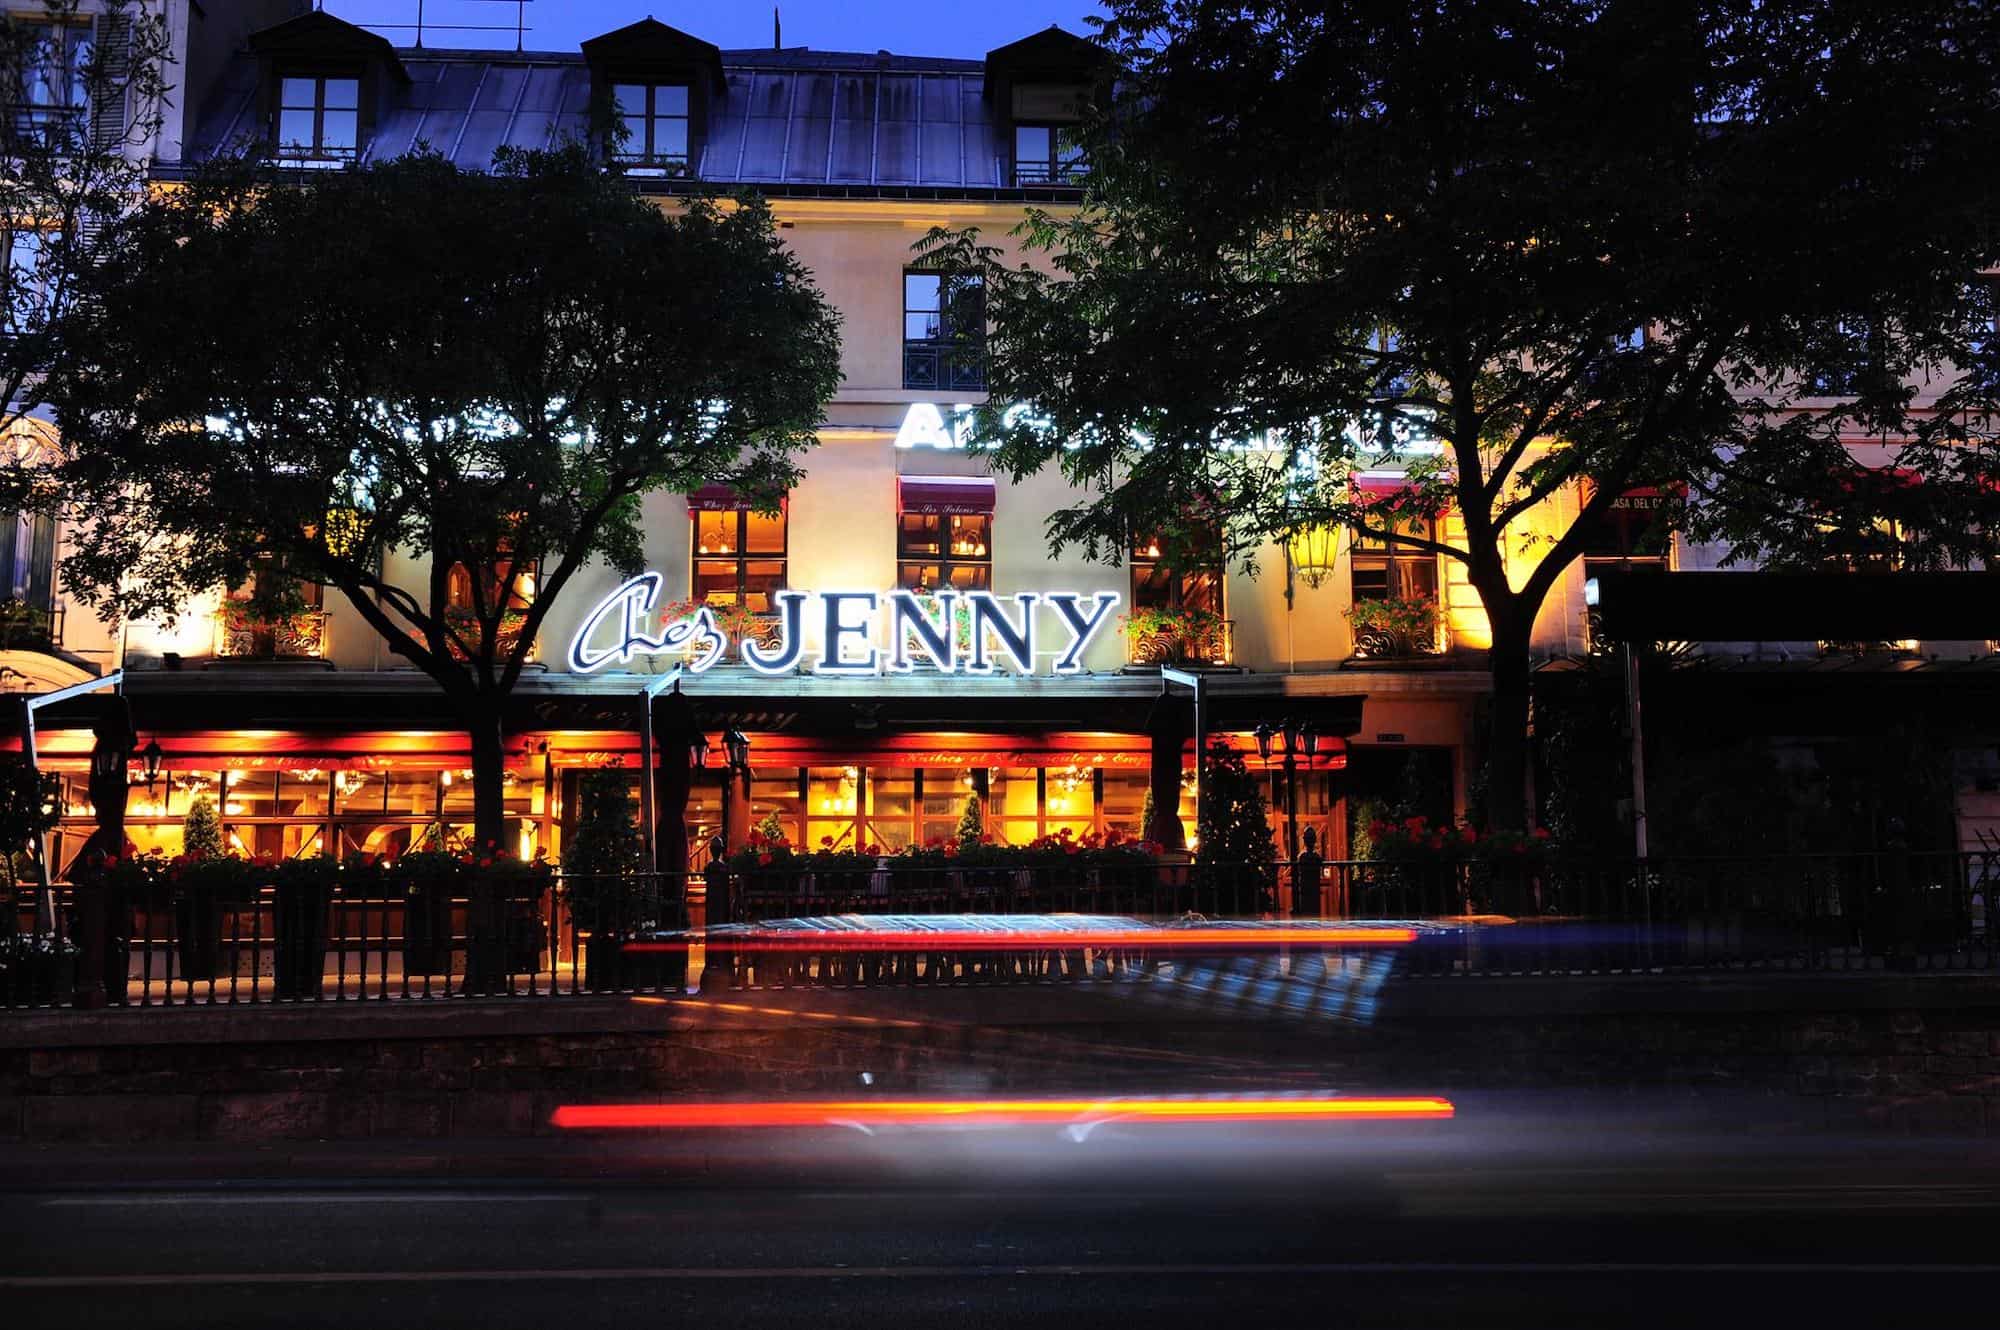 The exterior of the restaurant Chez Jenny in Paris at night time, with a large white neon sign saying Chez Jenny and streaks of light in front from a passing car. 